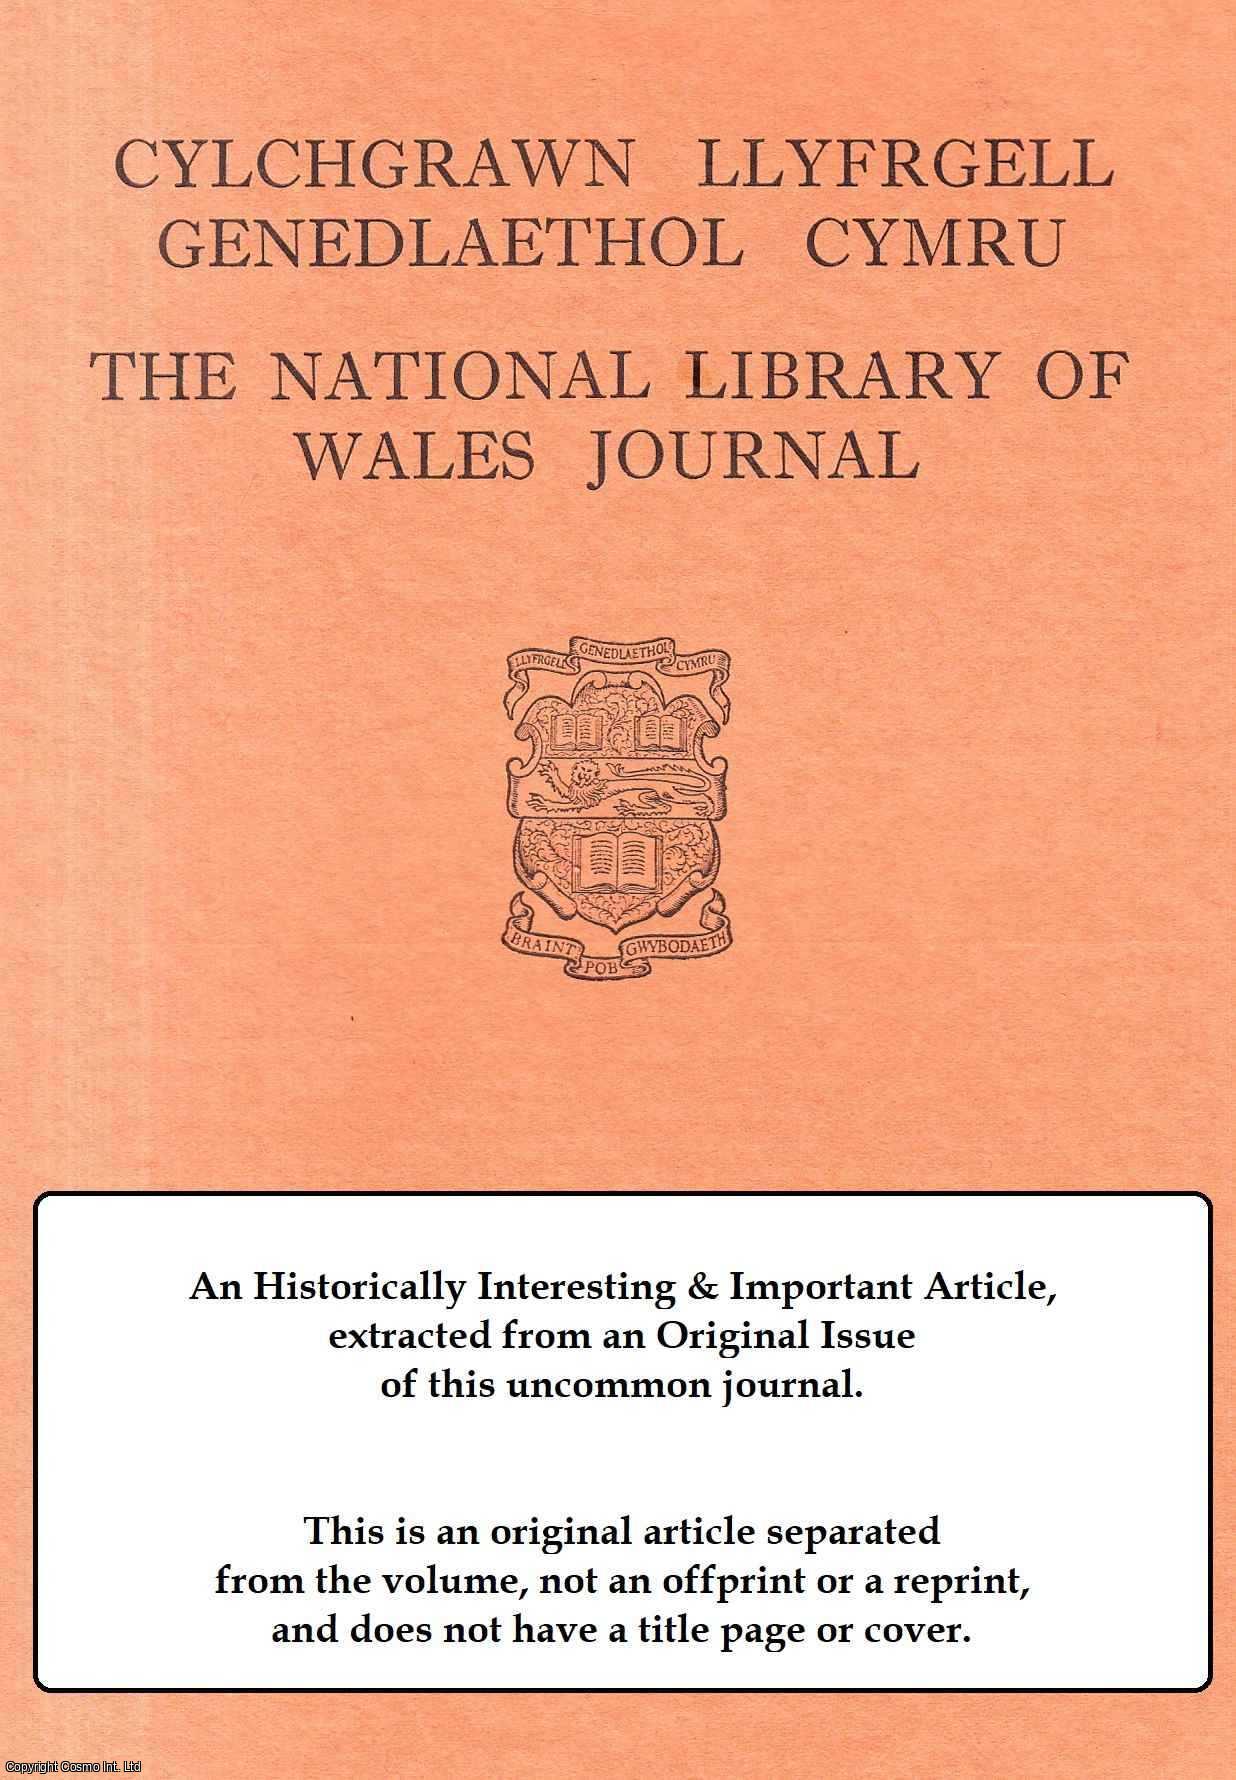 Peter C. Bartrum - The Ancestors of My Lord Herbert. An original article from The National Library of Wales Journal, 1972.